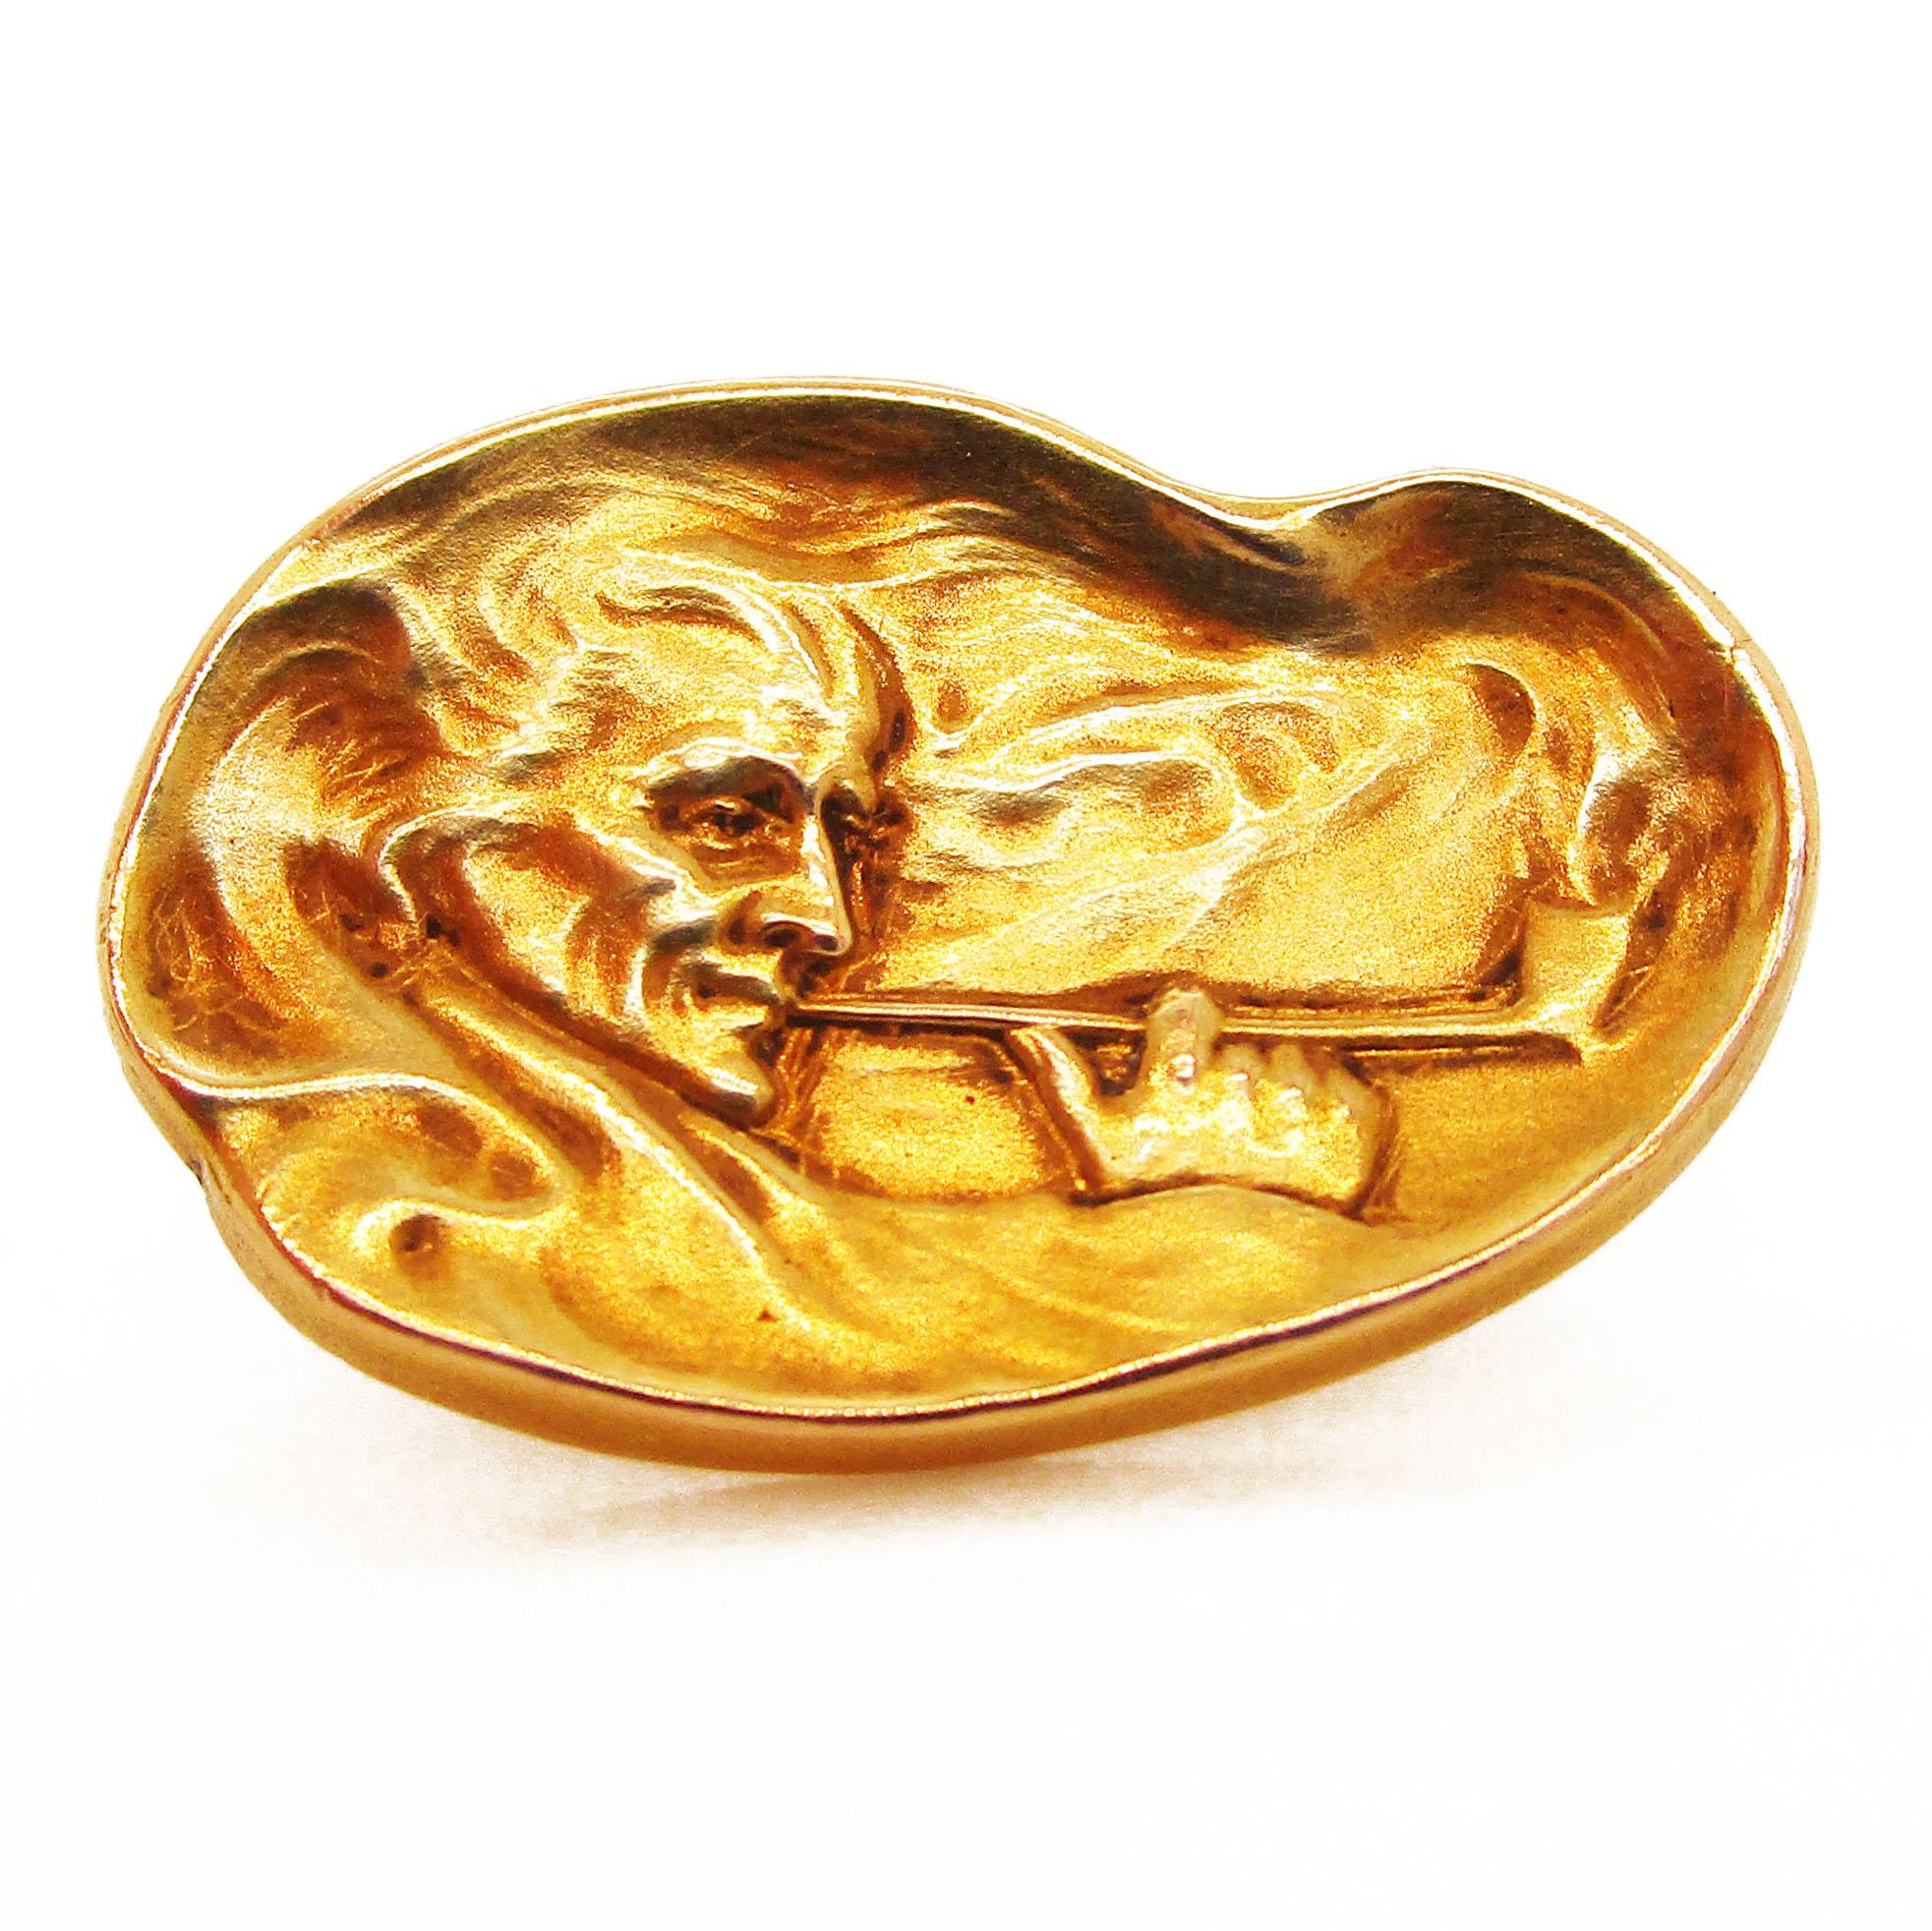 These magnificent Art Nouveau cufflinks date back to 1890 and boast rich 14k yellow gold and an incredibly detailed engraved image of a pipe-smoking man. These links are solid 14 karat yellow gold, lending them an excellent weight and a bright color